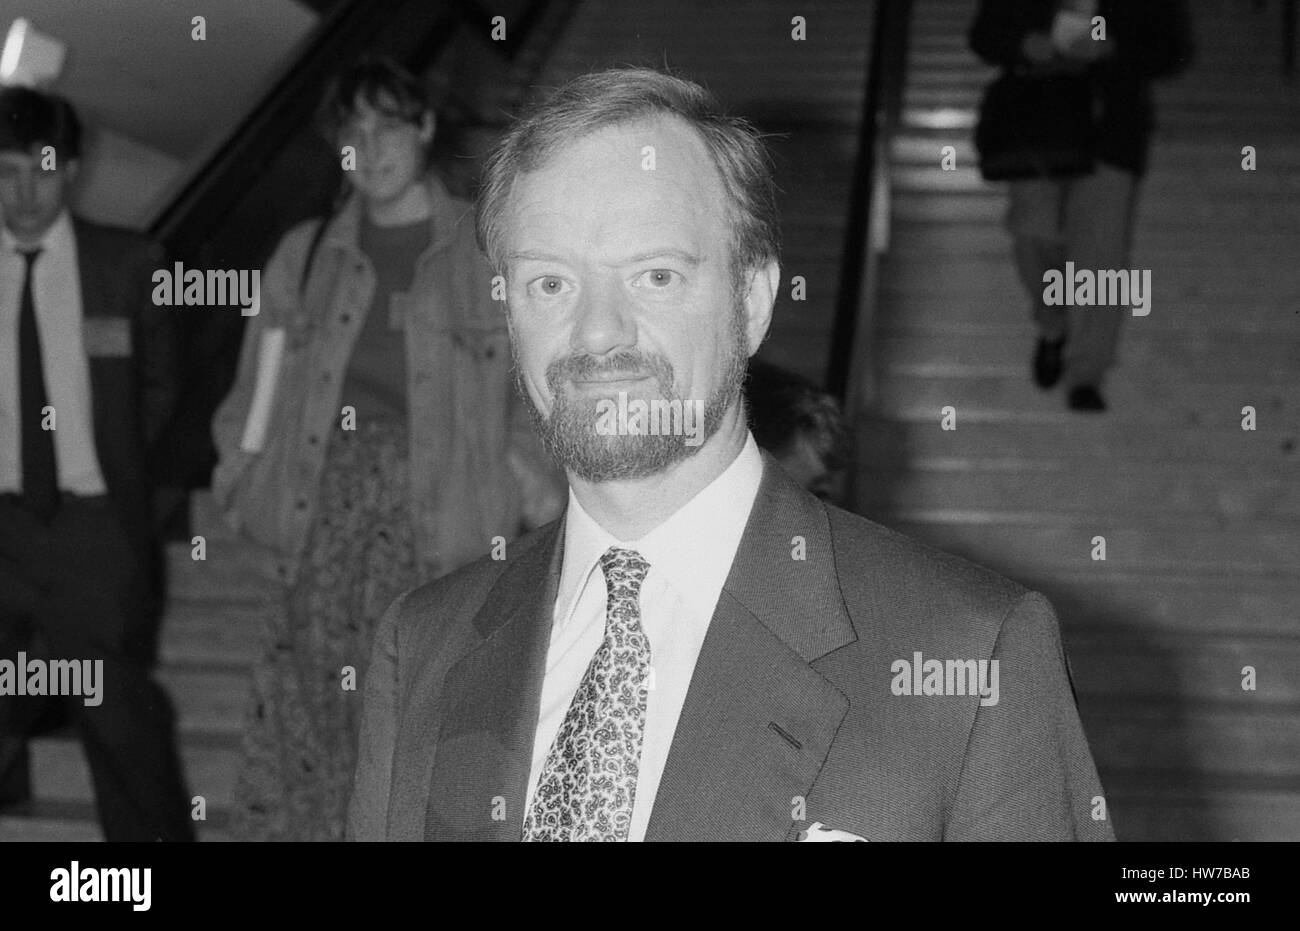 Robin Cook, Shadow Secretary of State for Health and Labour party Member of Parliament for Livingstone, attends the party conference in Brighton, England on October 1, 1991. Stock Photo